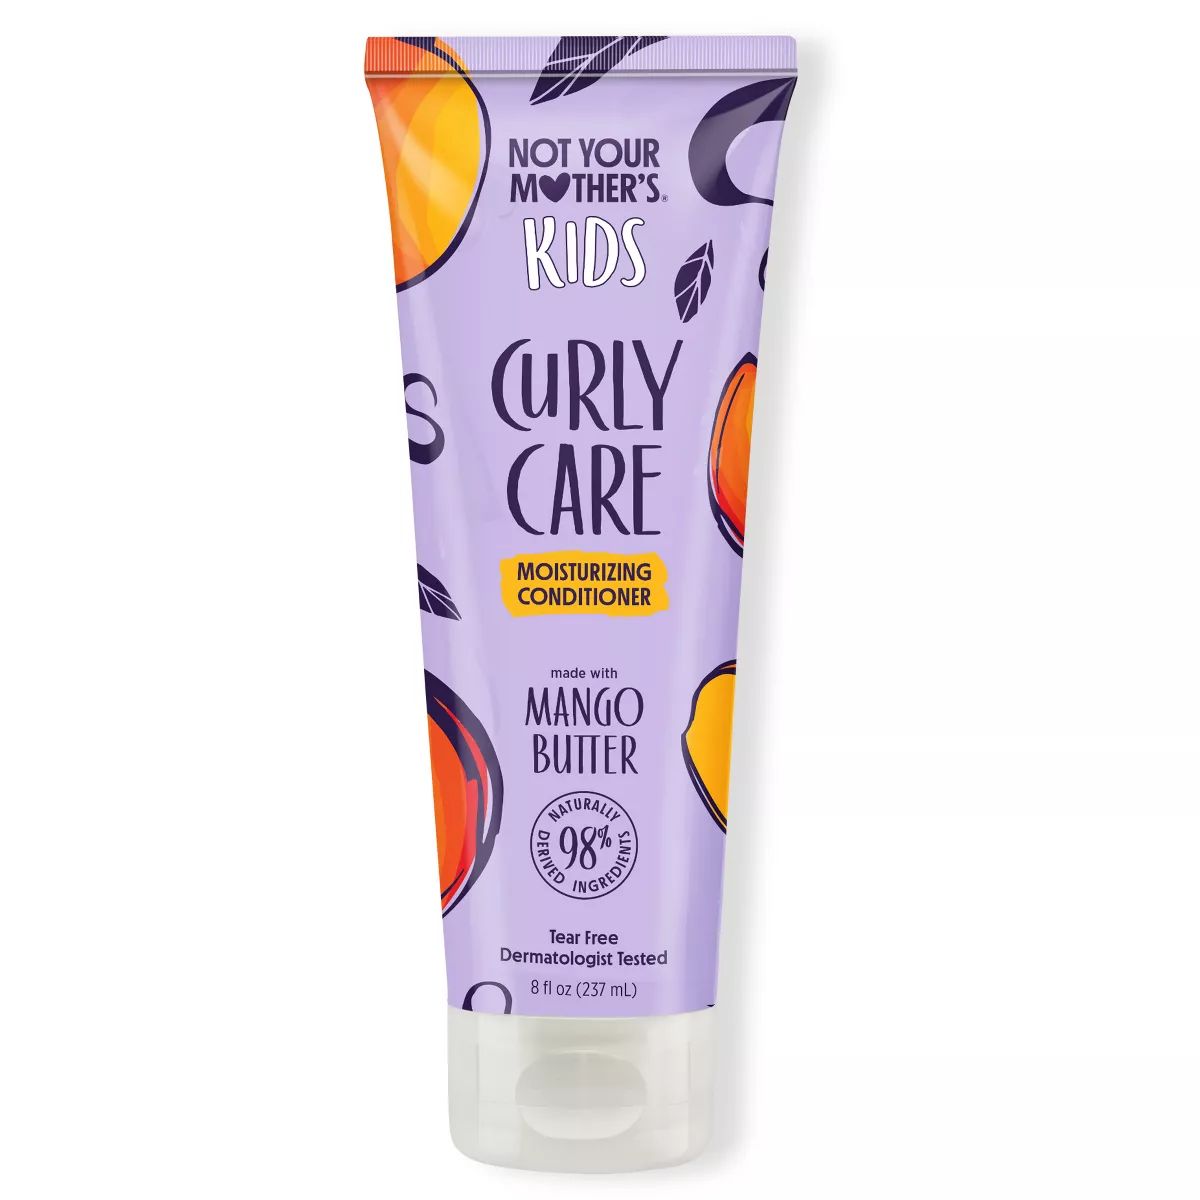 Not Your Mother's Kids' Curl Conditioner Tube for Curly Hair - 8 fl oz | Target